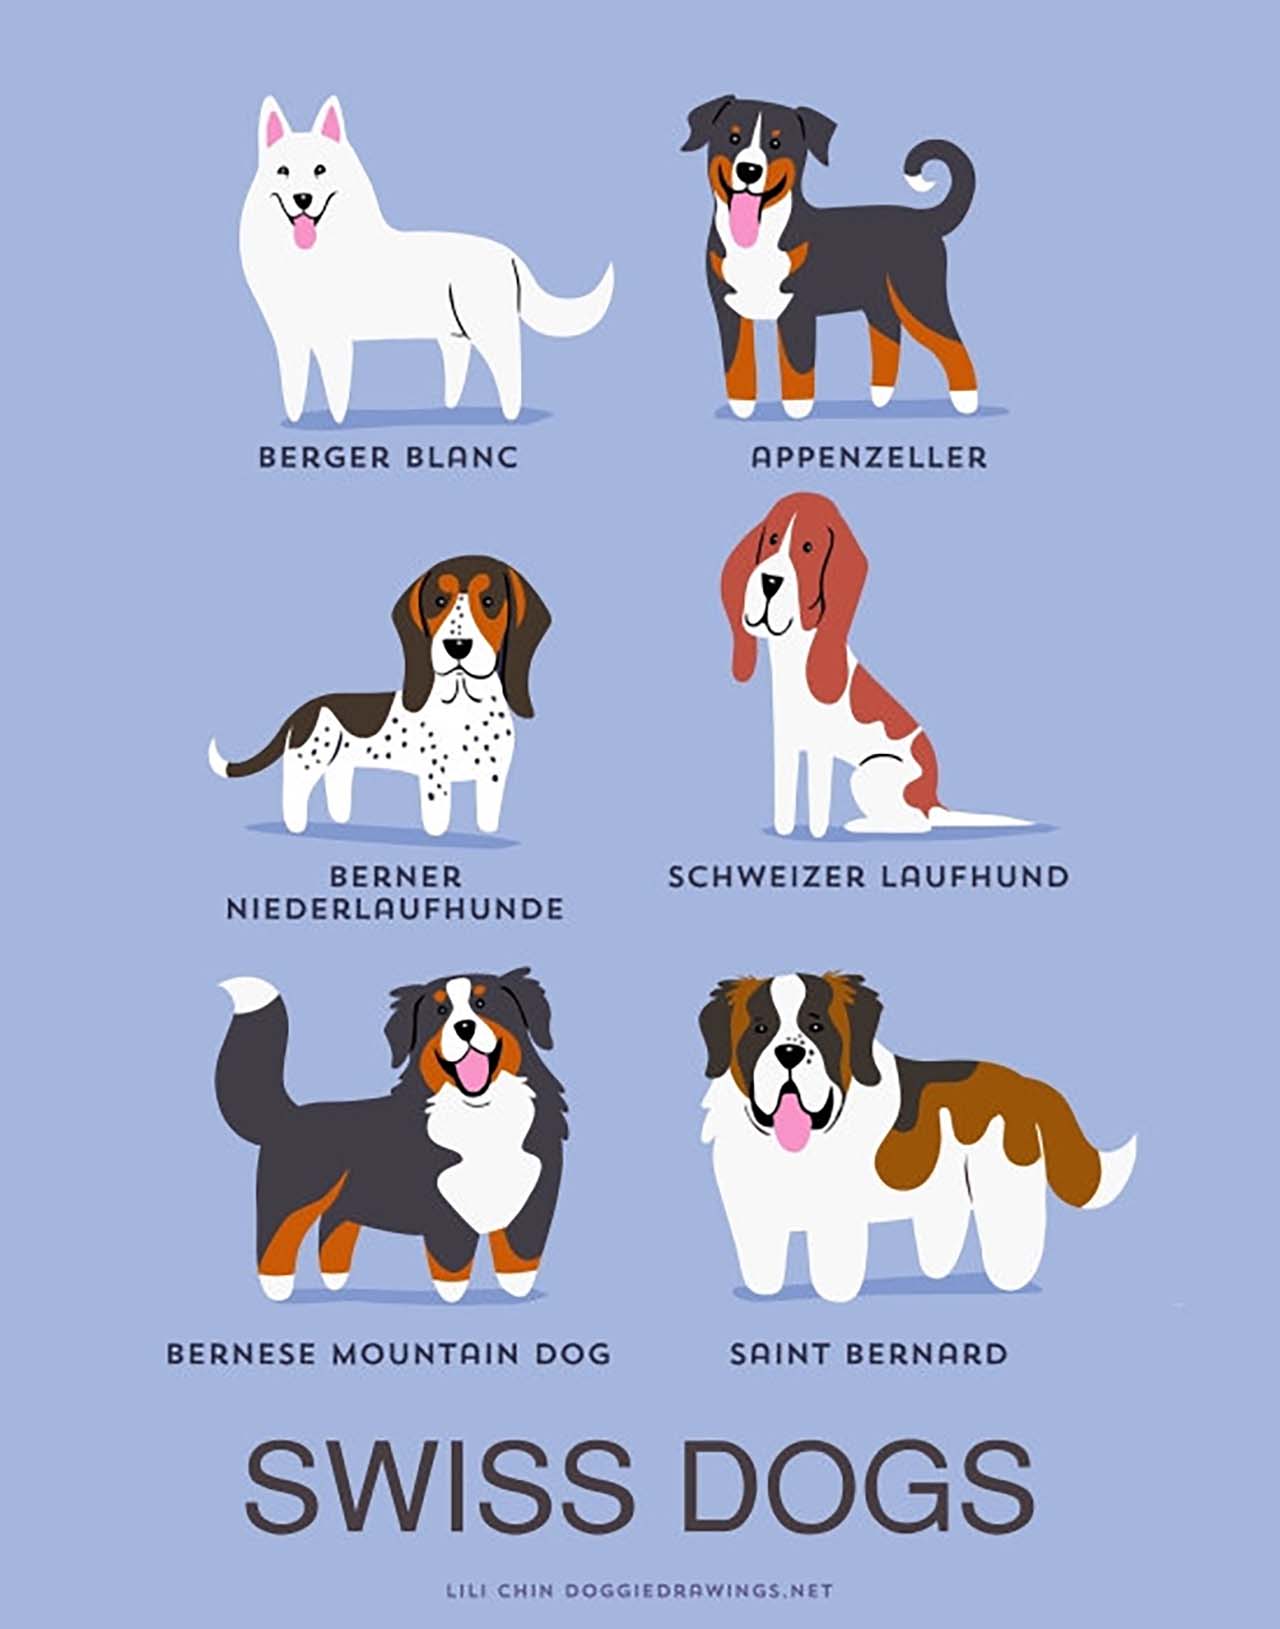 Origin Of Dogs: Cute Illustration By Lili Chin Show Where Dog Breeds Originating From #13: Swiss Dogs